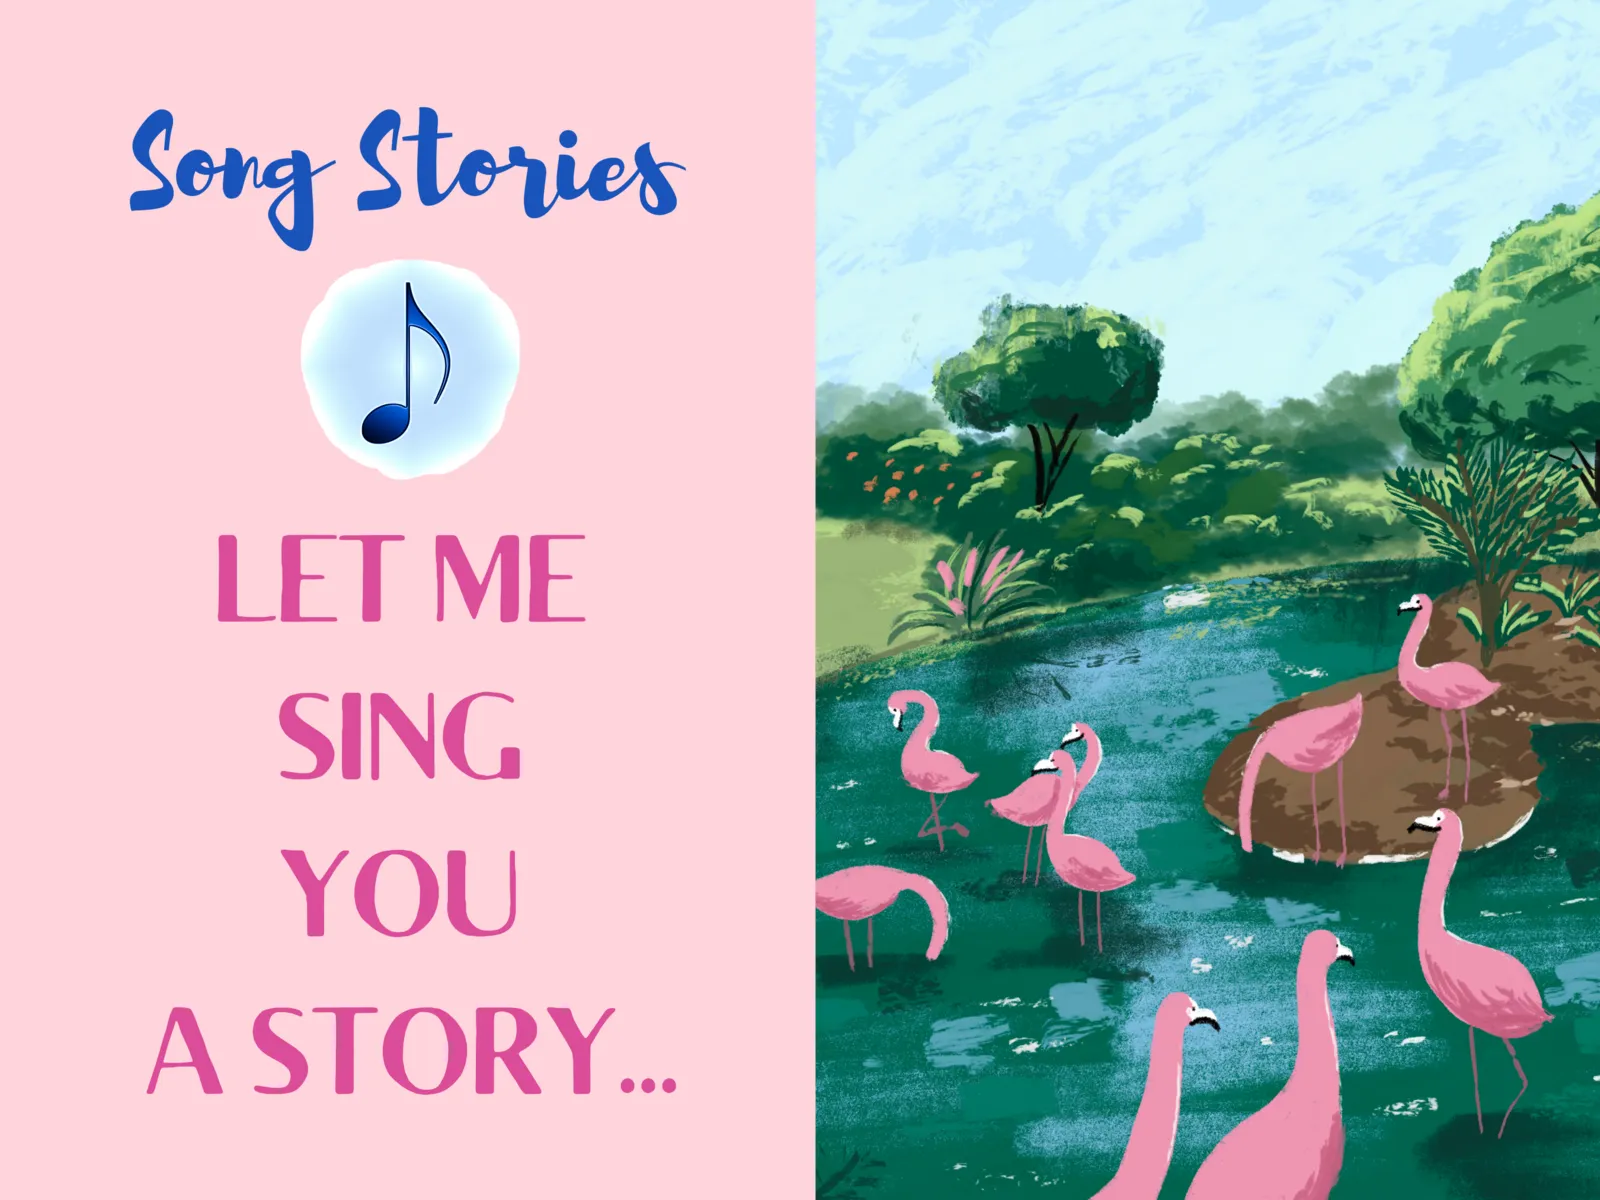 primary singing time song stories story songs sharla dance